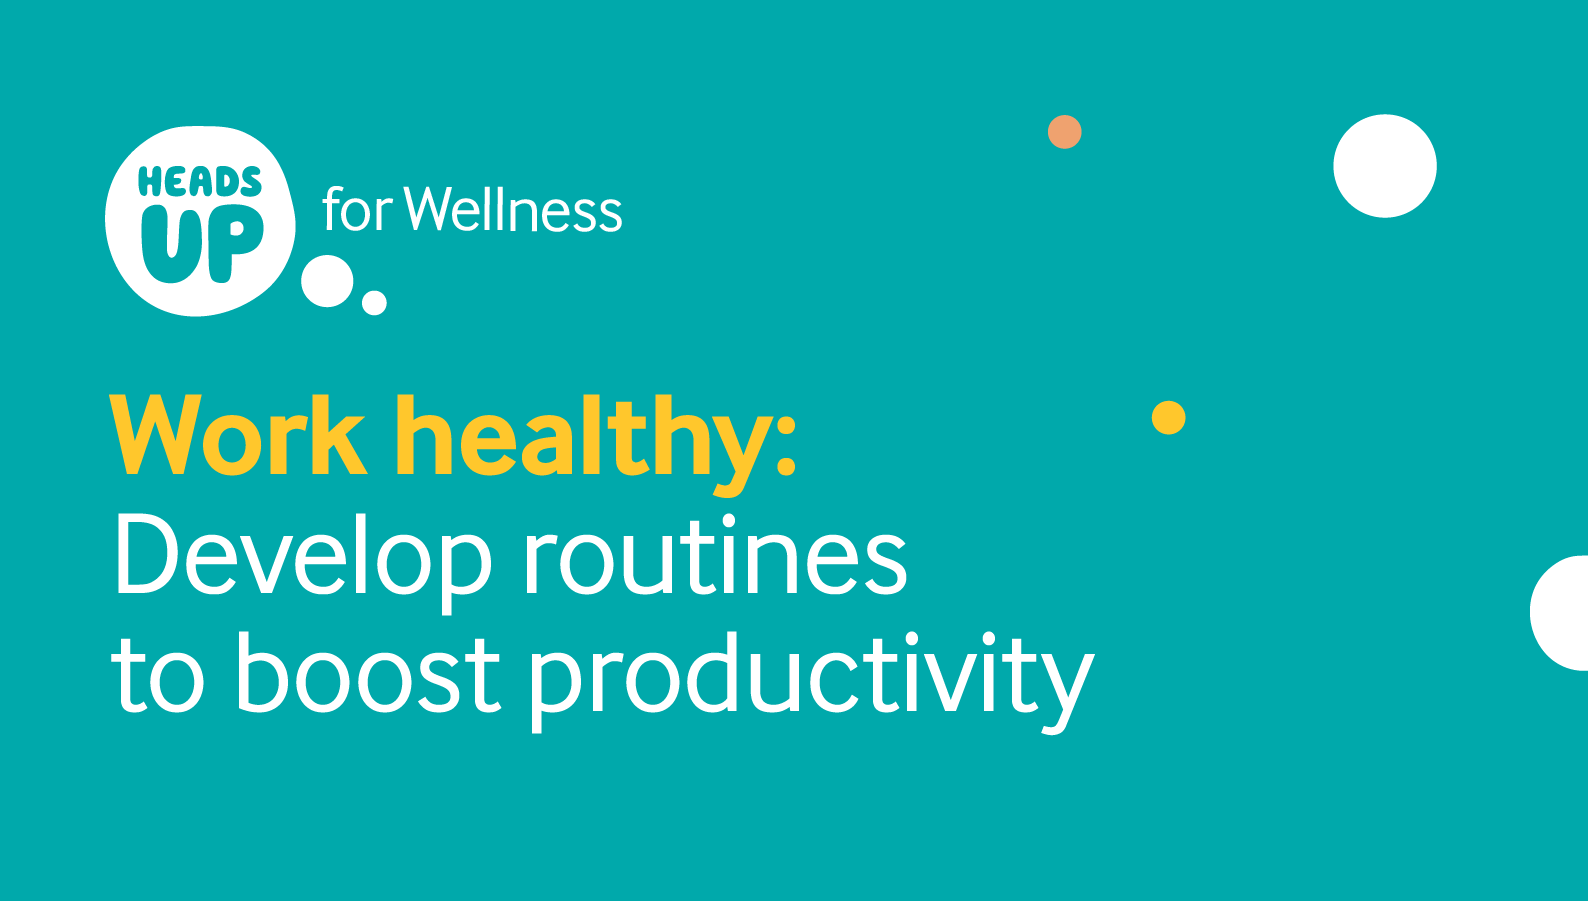 Work healthy: Resources to help you build productive routines